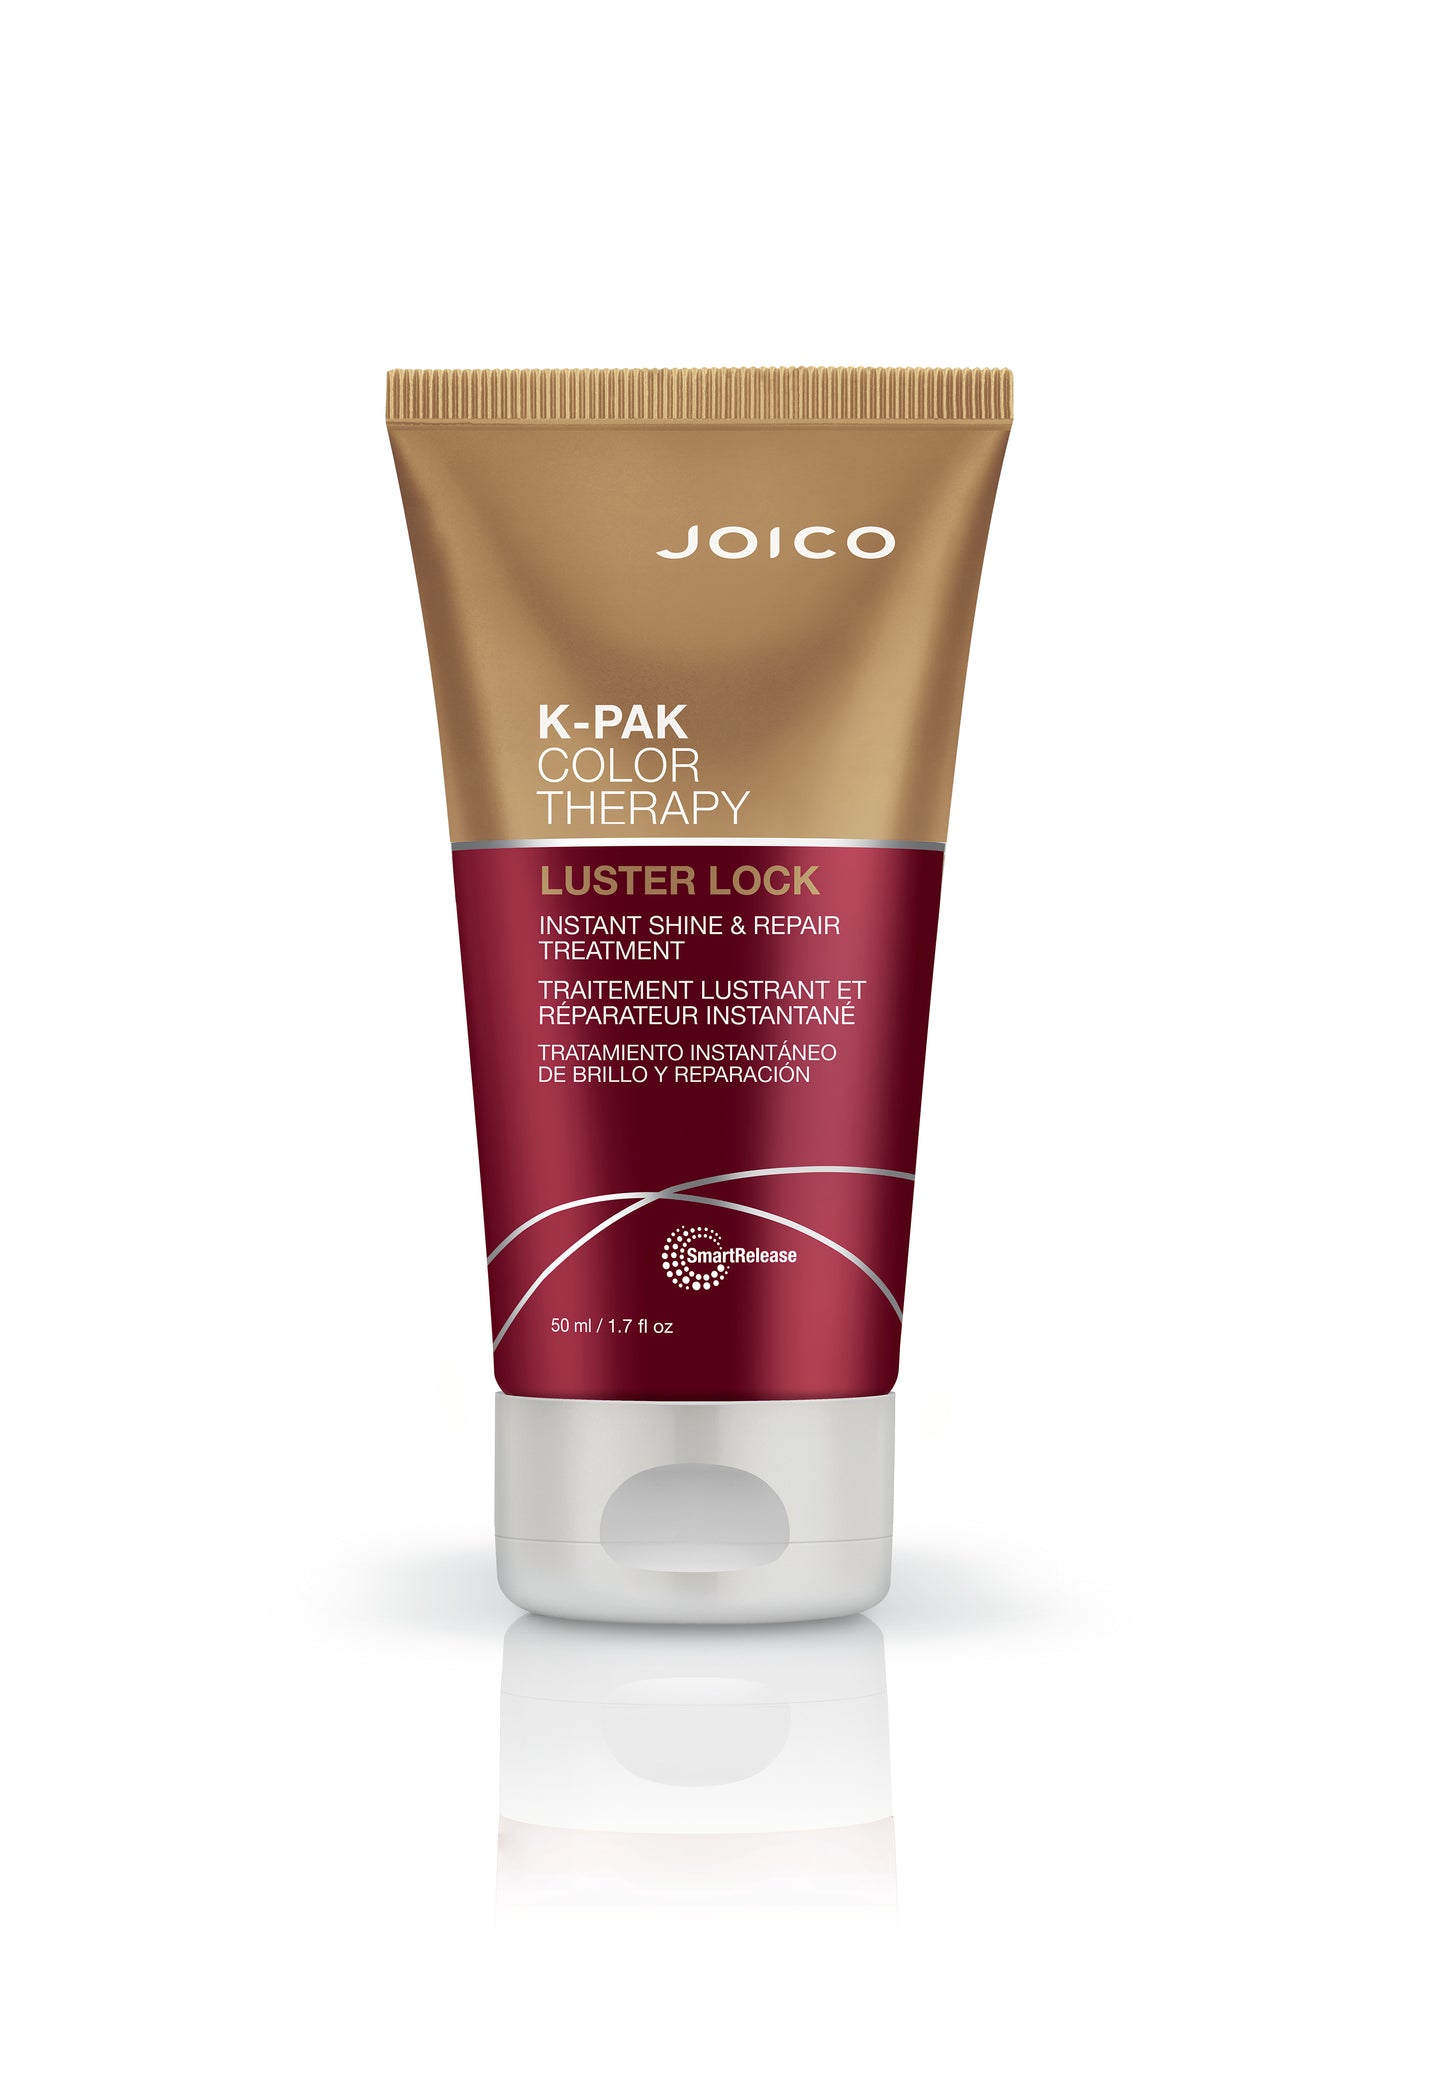 Joico K-Pak Color Therapy Luster Lock Treatment 50ml